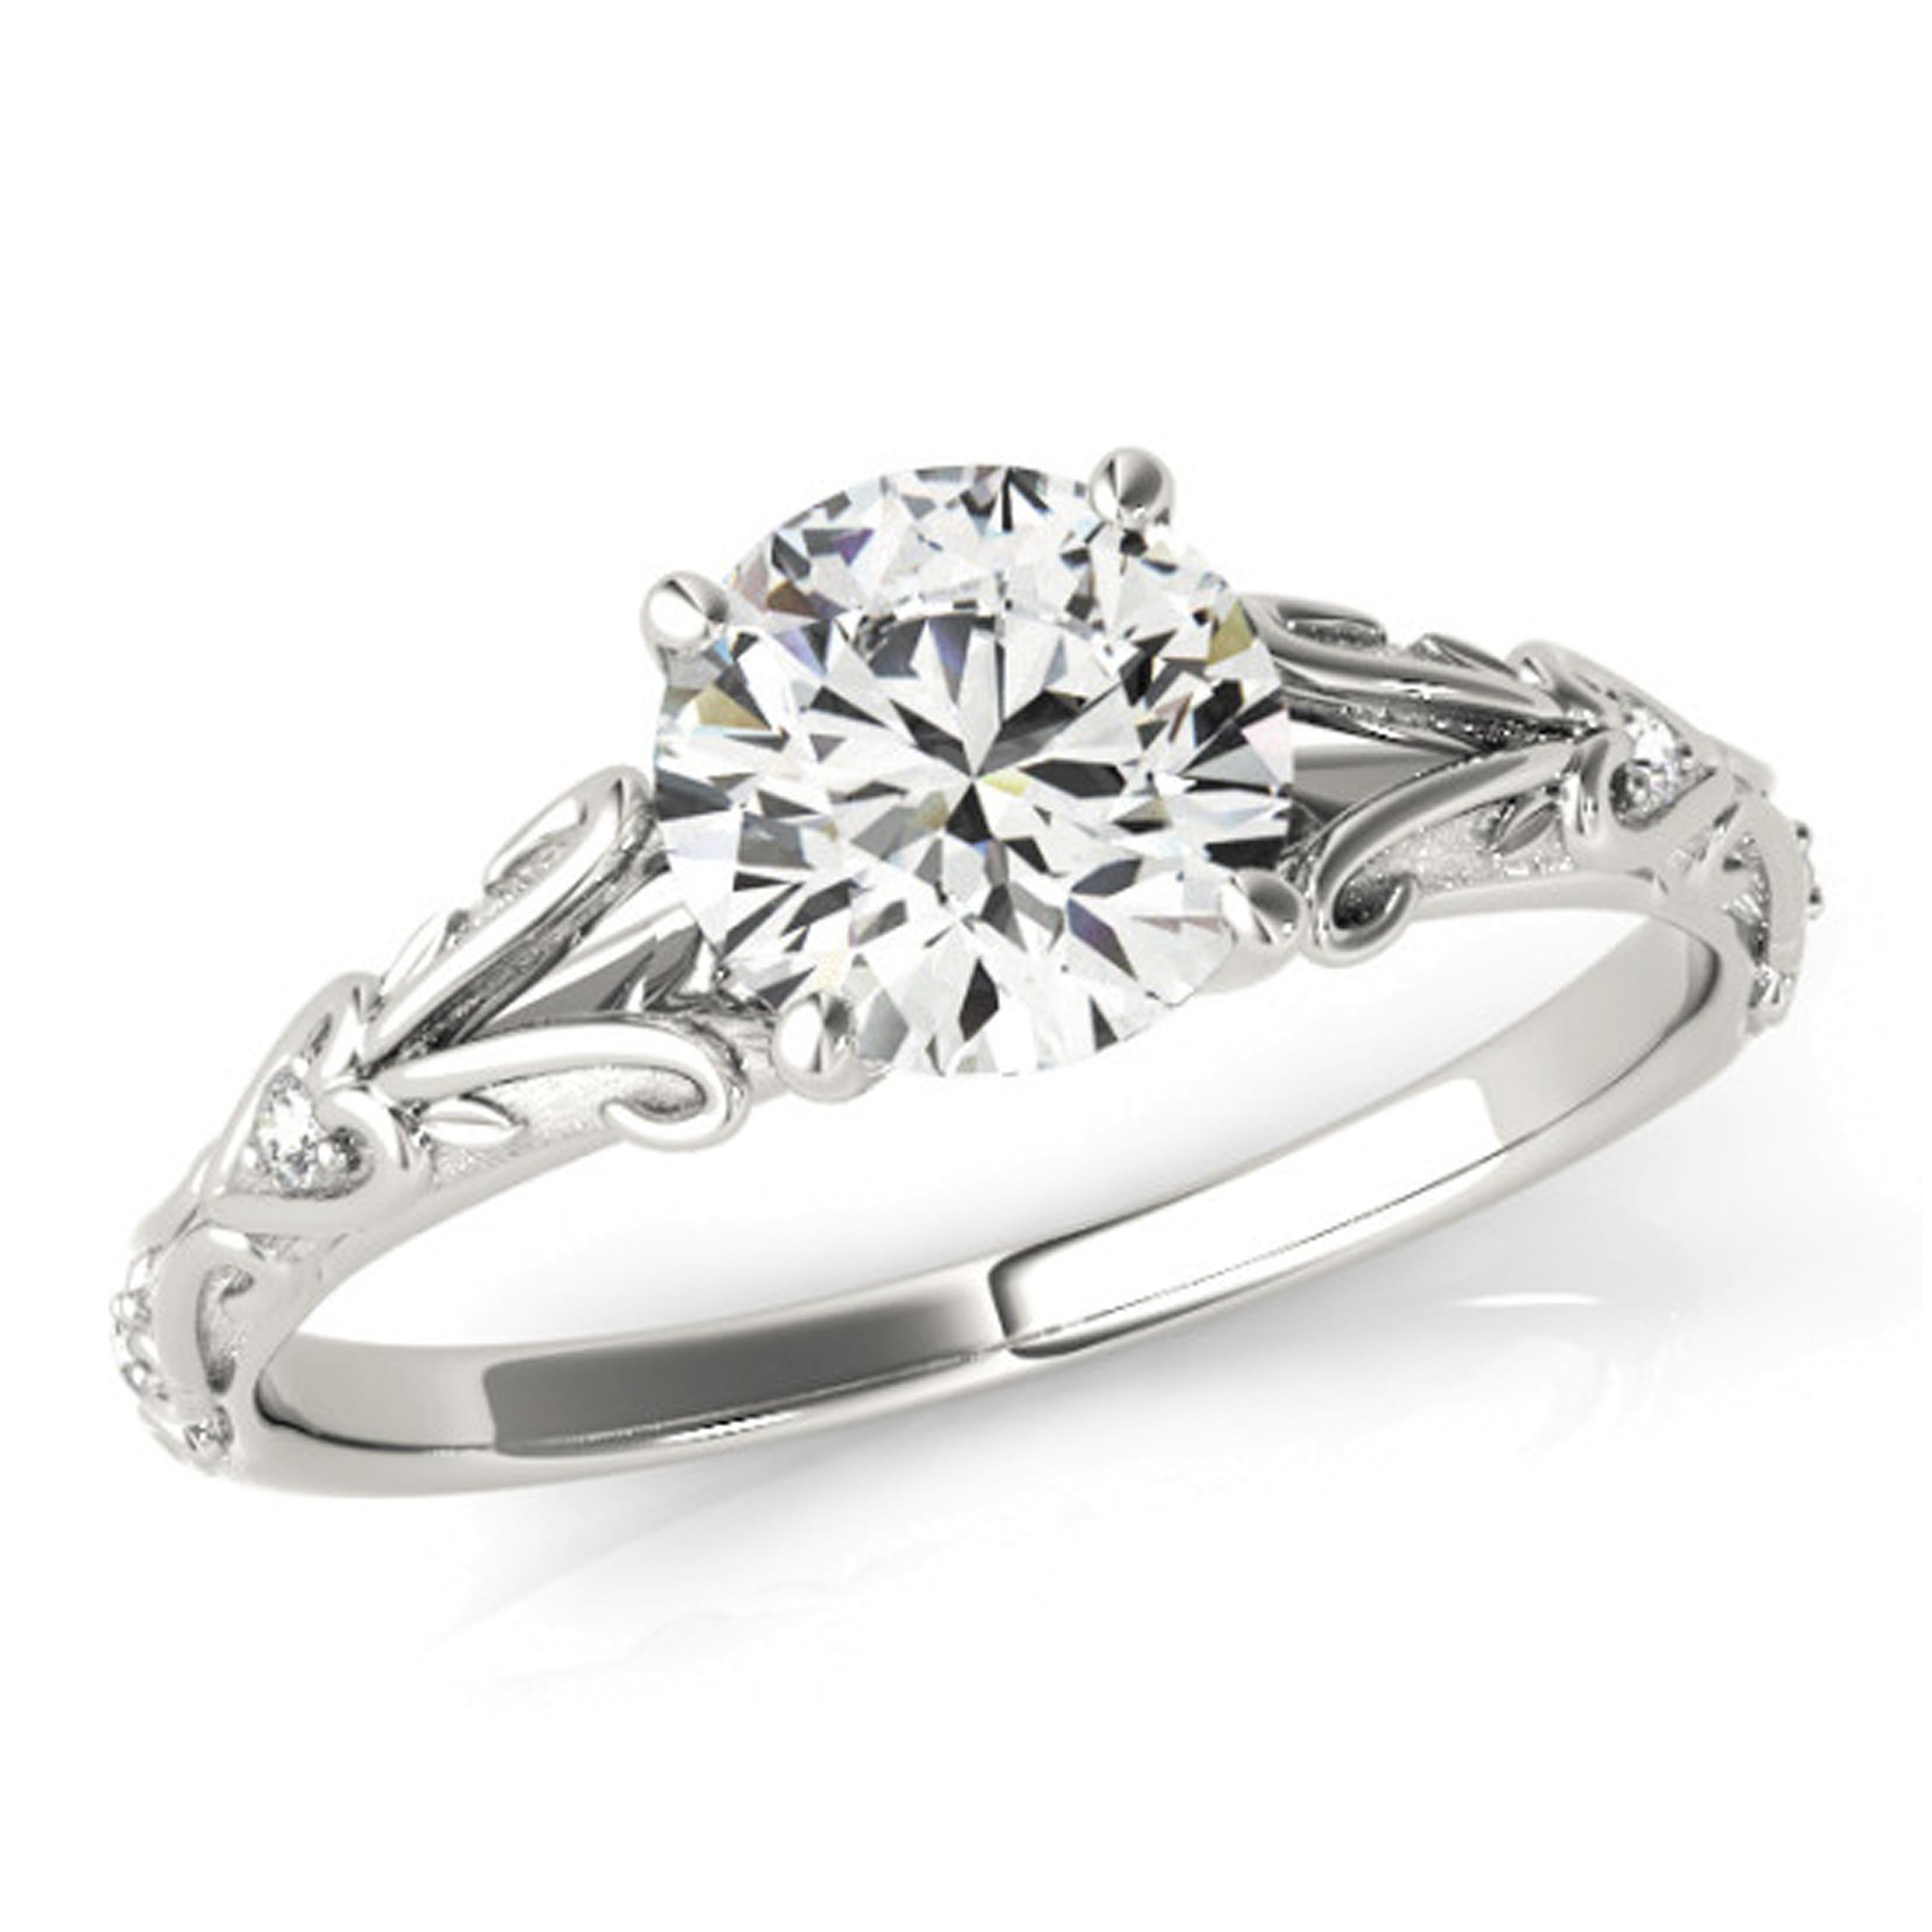 Filigree heart scrolls decorate the shank of this vintage style diamond engagement ring. Secured with prongs, the 9mm moissanite center stone shines brilliantly in the center. Handcrafted meticulously in 18k white gold, additional diamonds line the